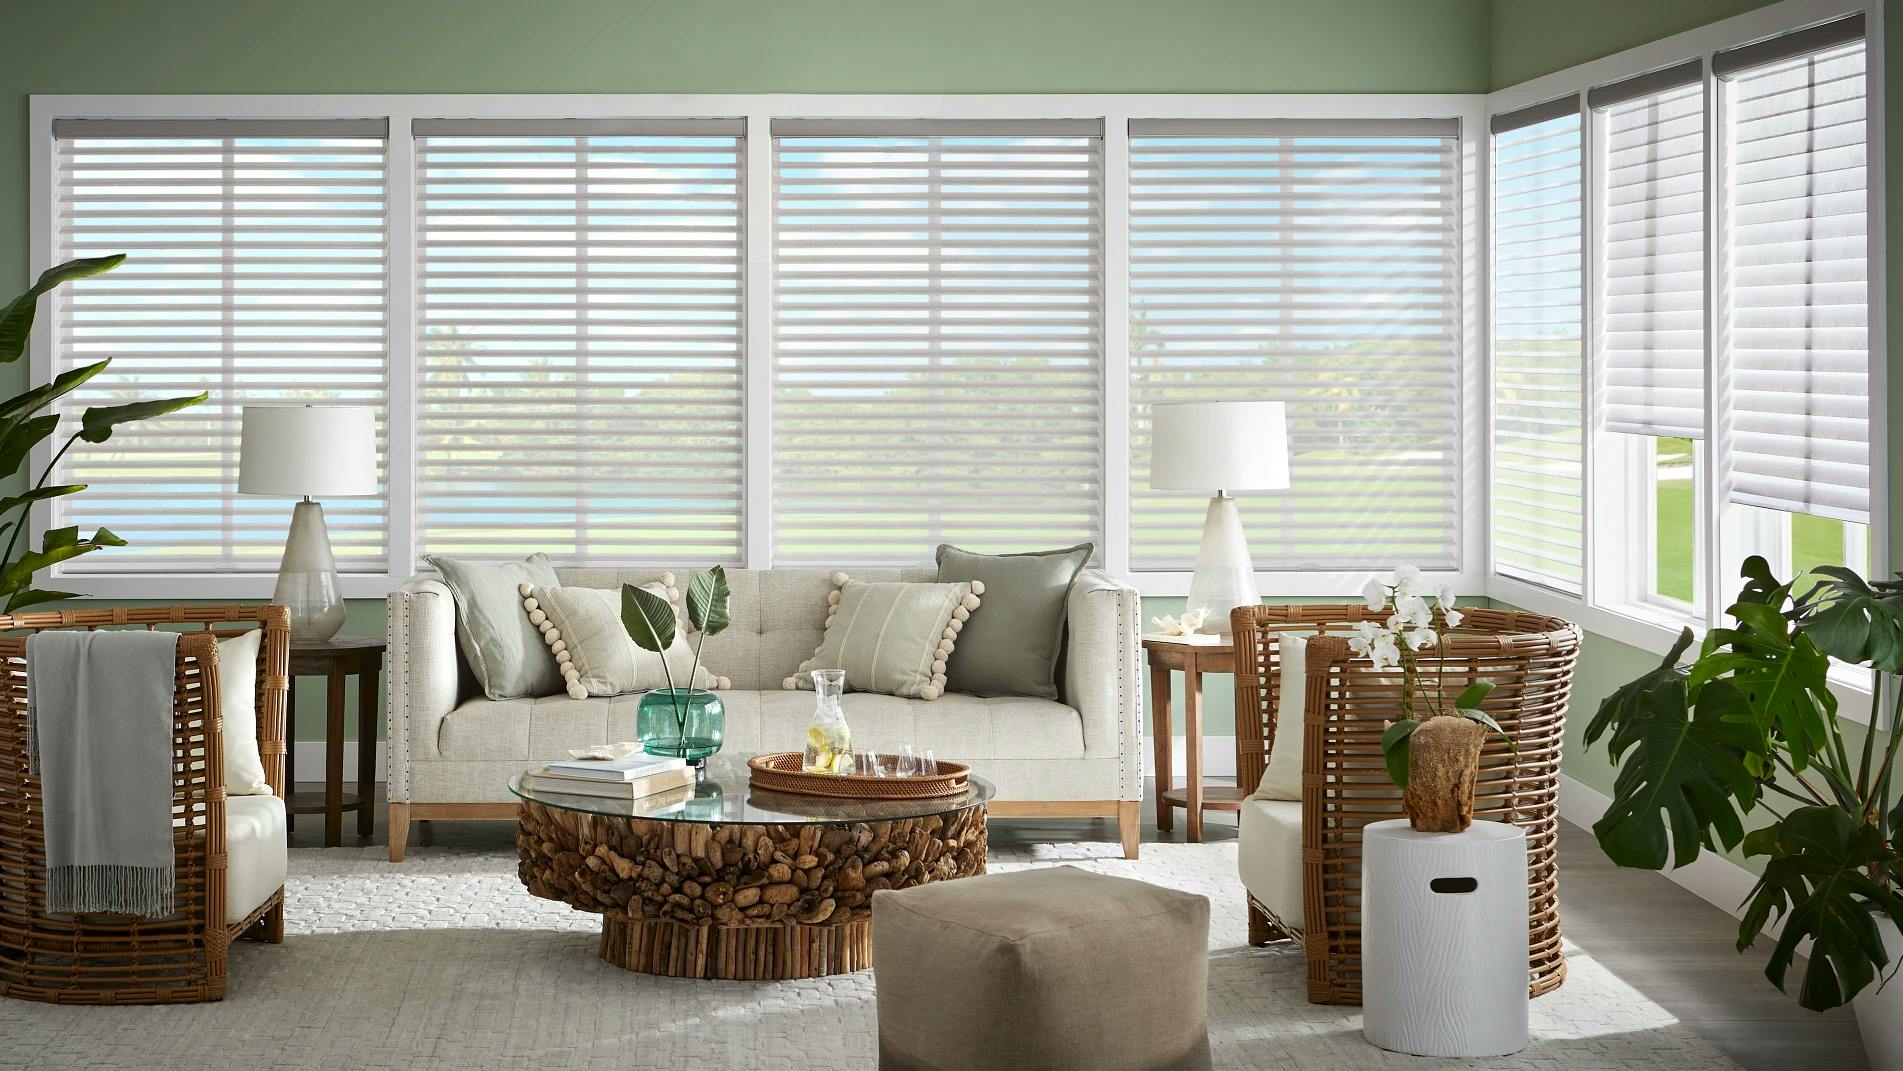 White wood blinds in a large open sunroom.